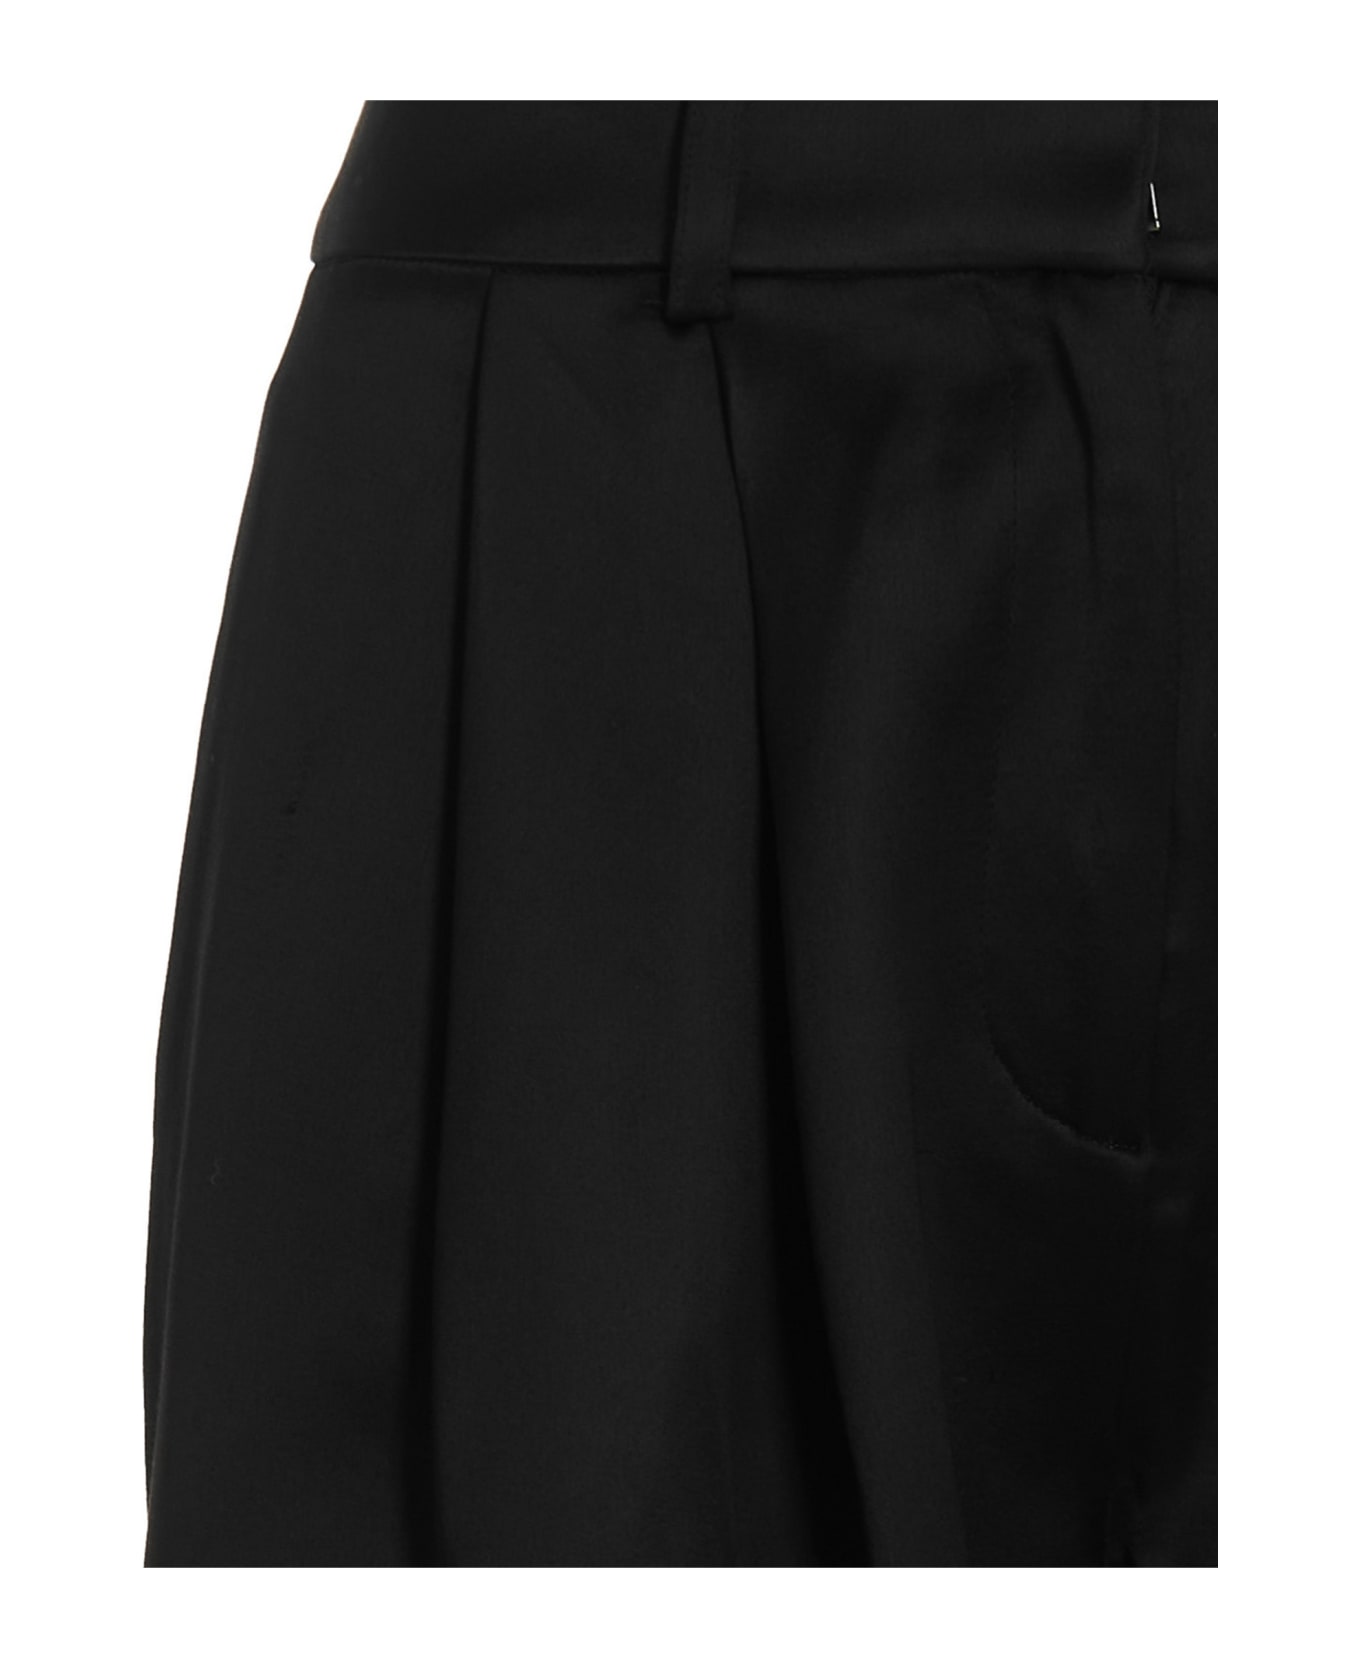 Co Pants With Front Pleats - Black   ボトムス